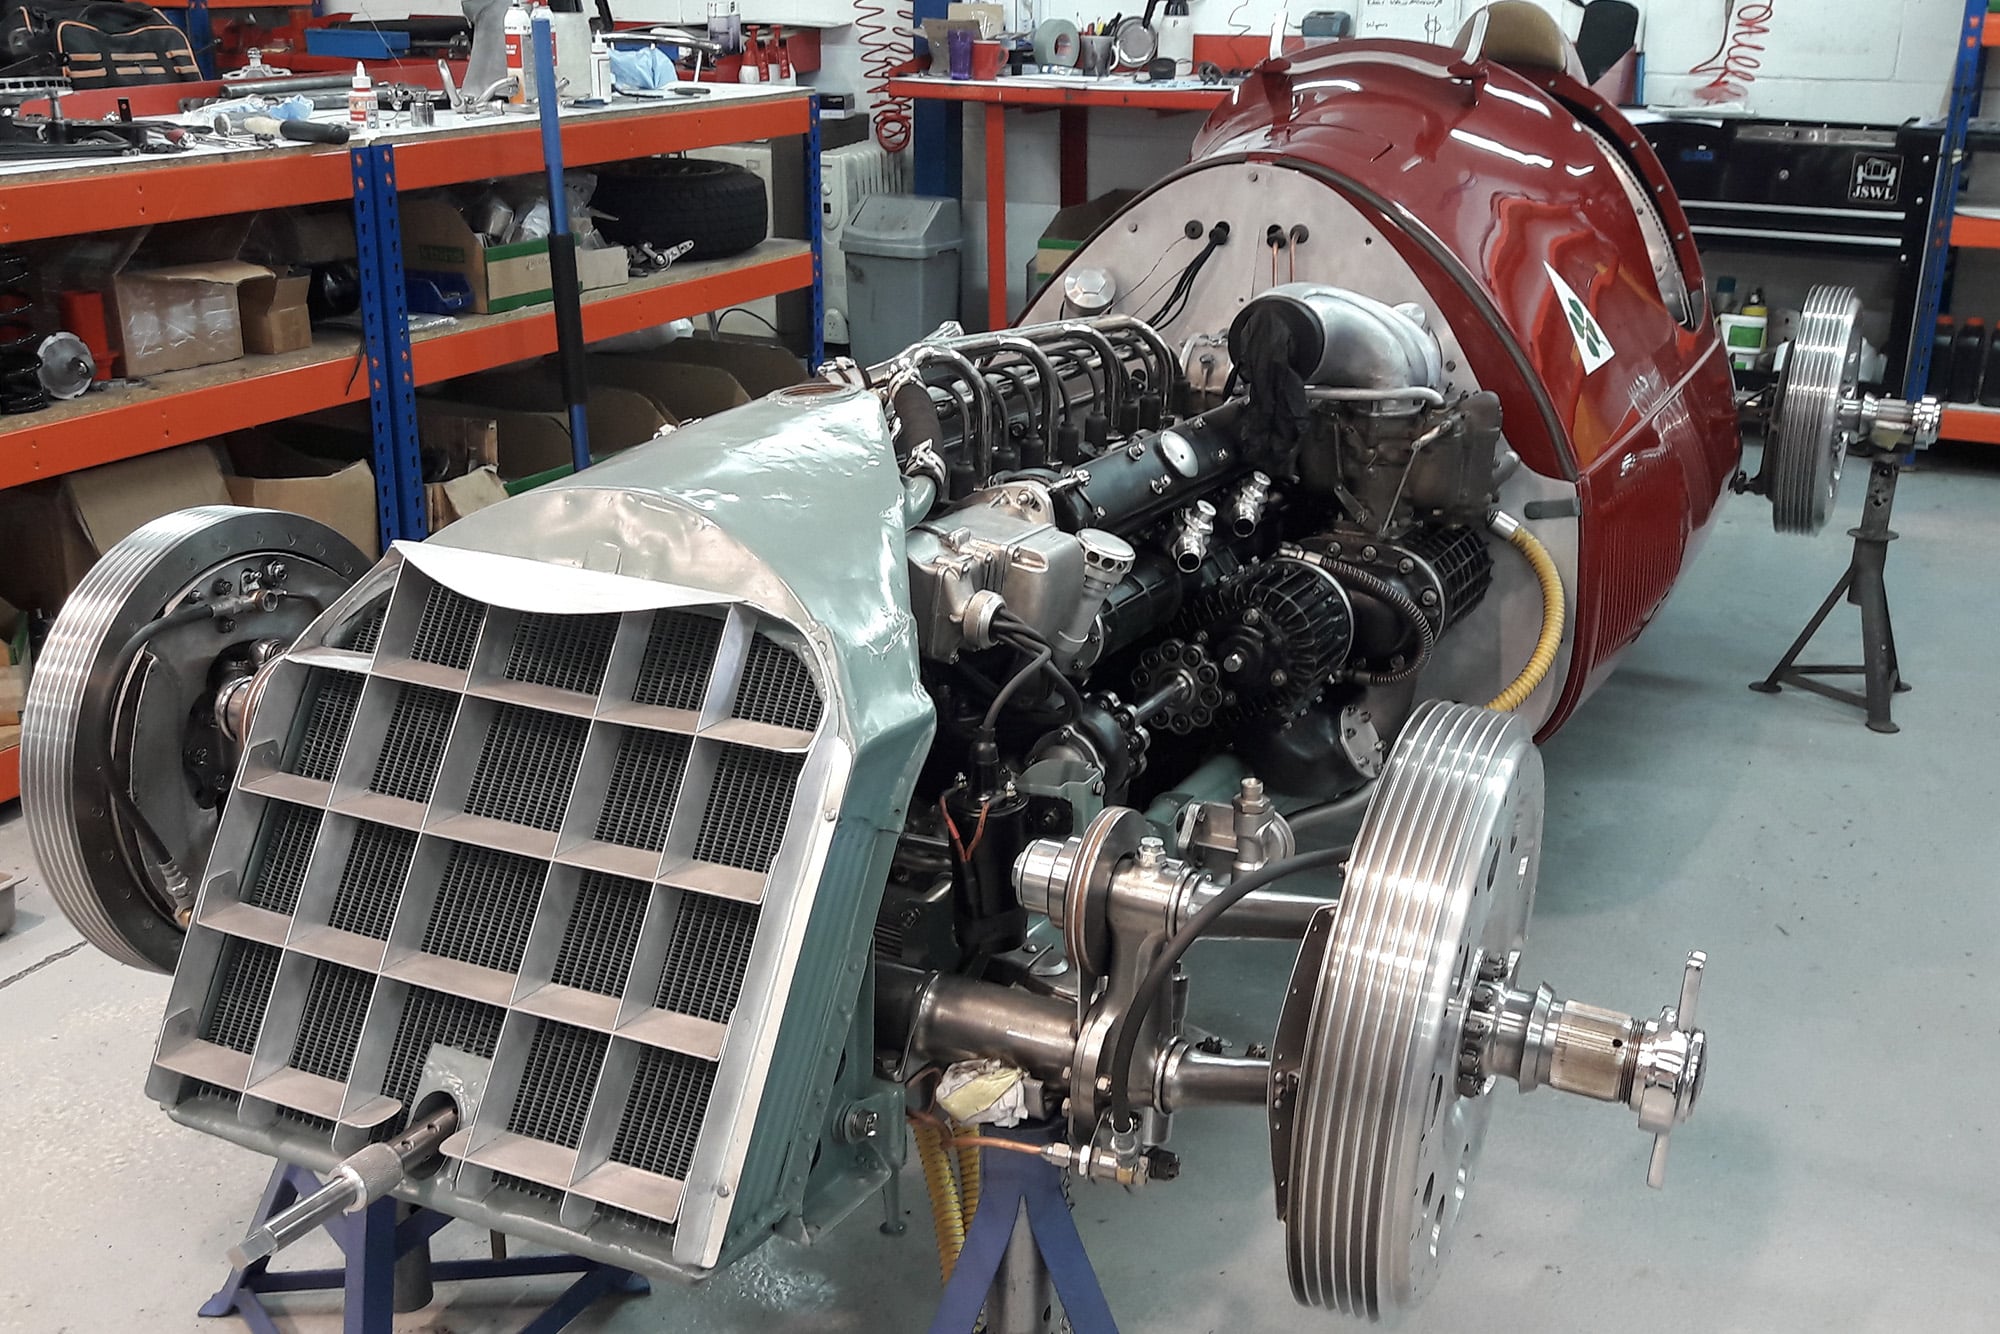 Almost completely restored Alfa 158 in the workshop